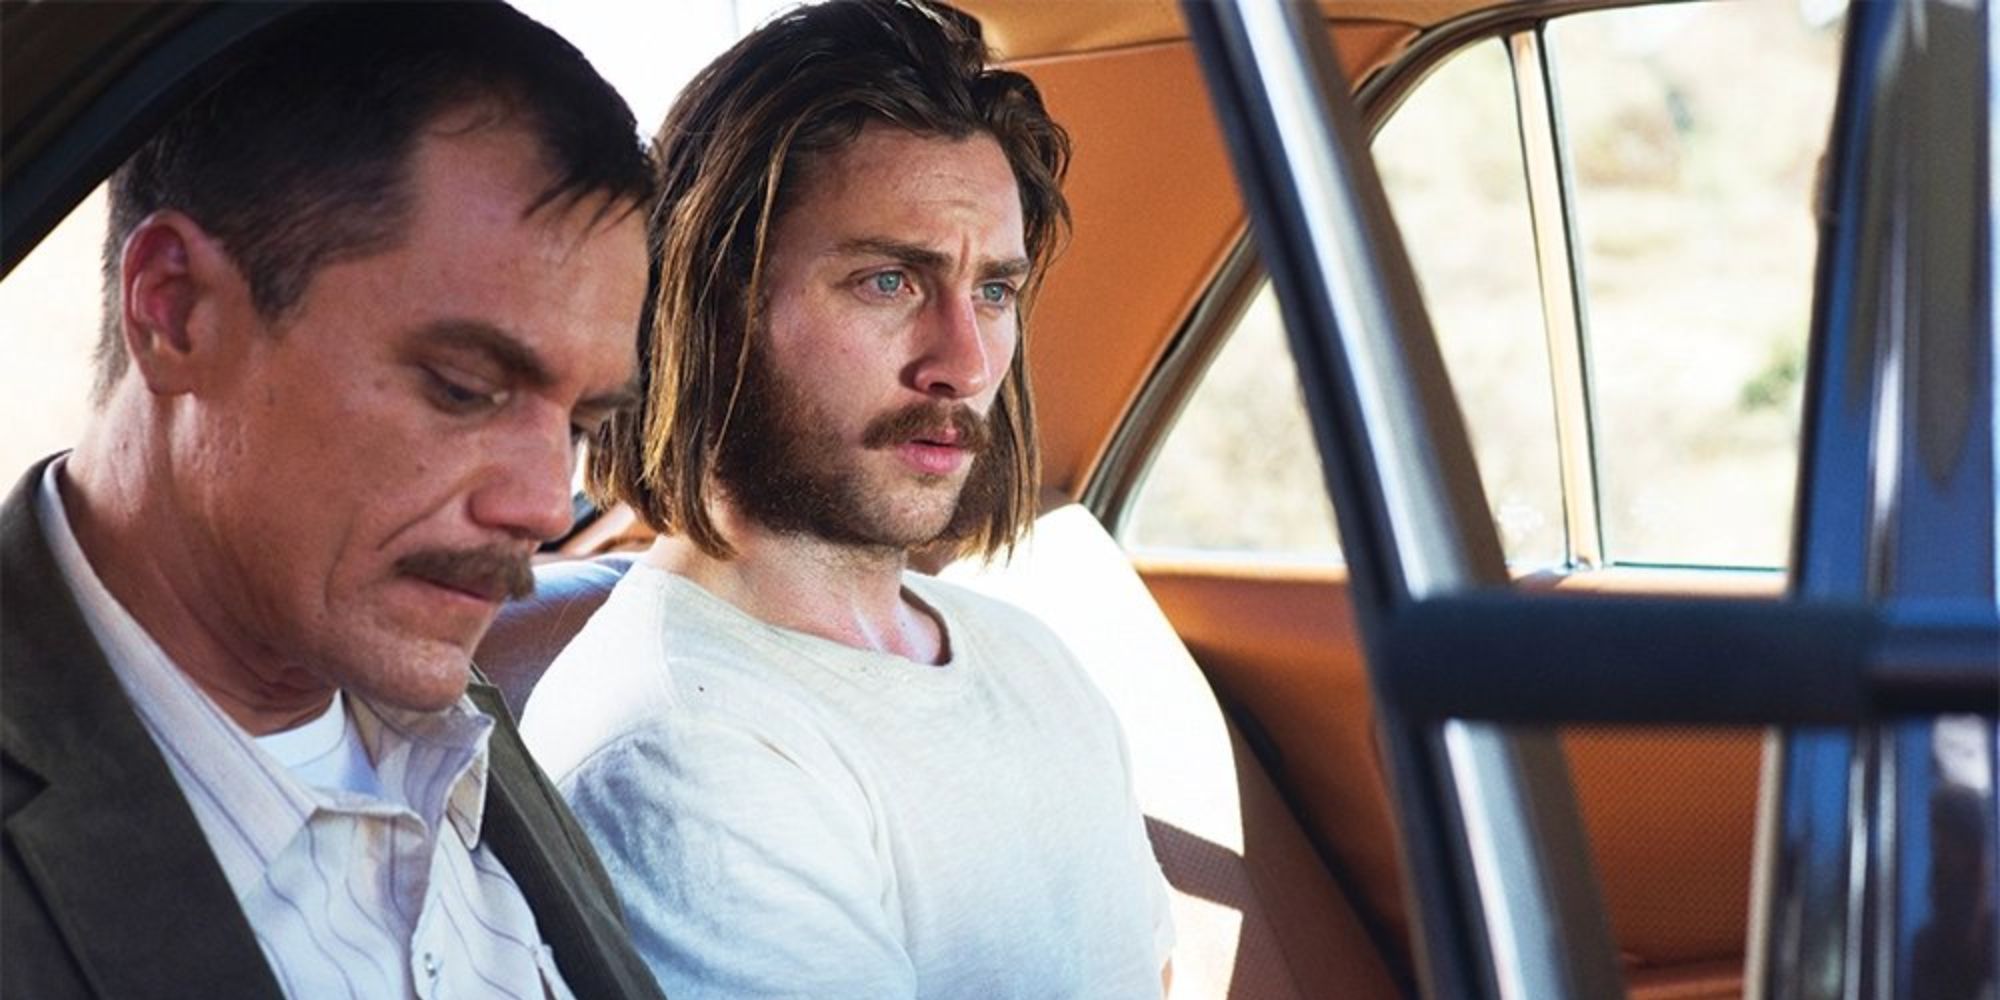 Detective Andes and Ray Marcus sitting inside a car in Nocturnal Animals.